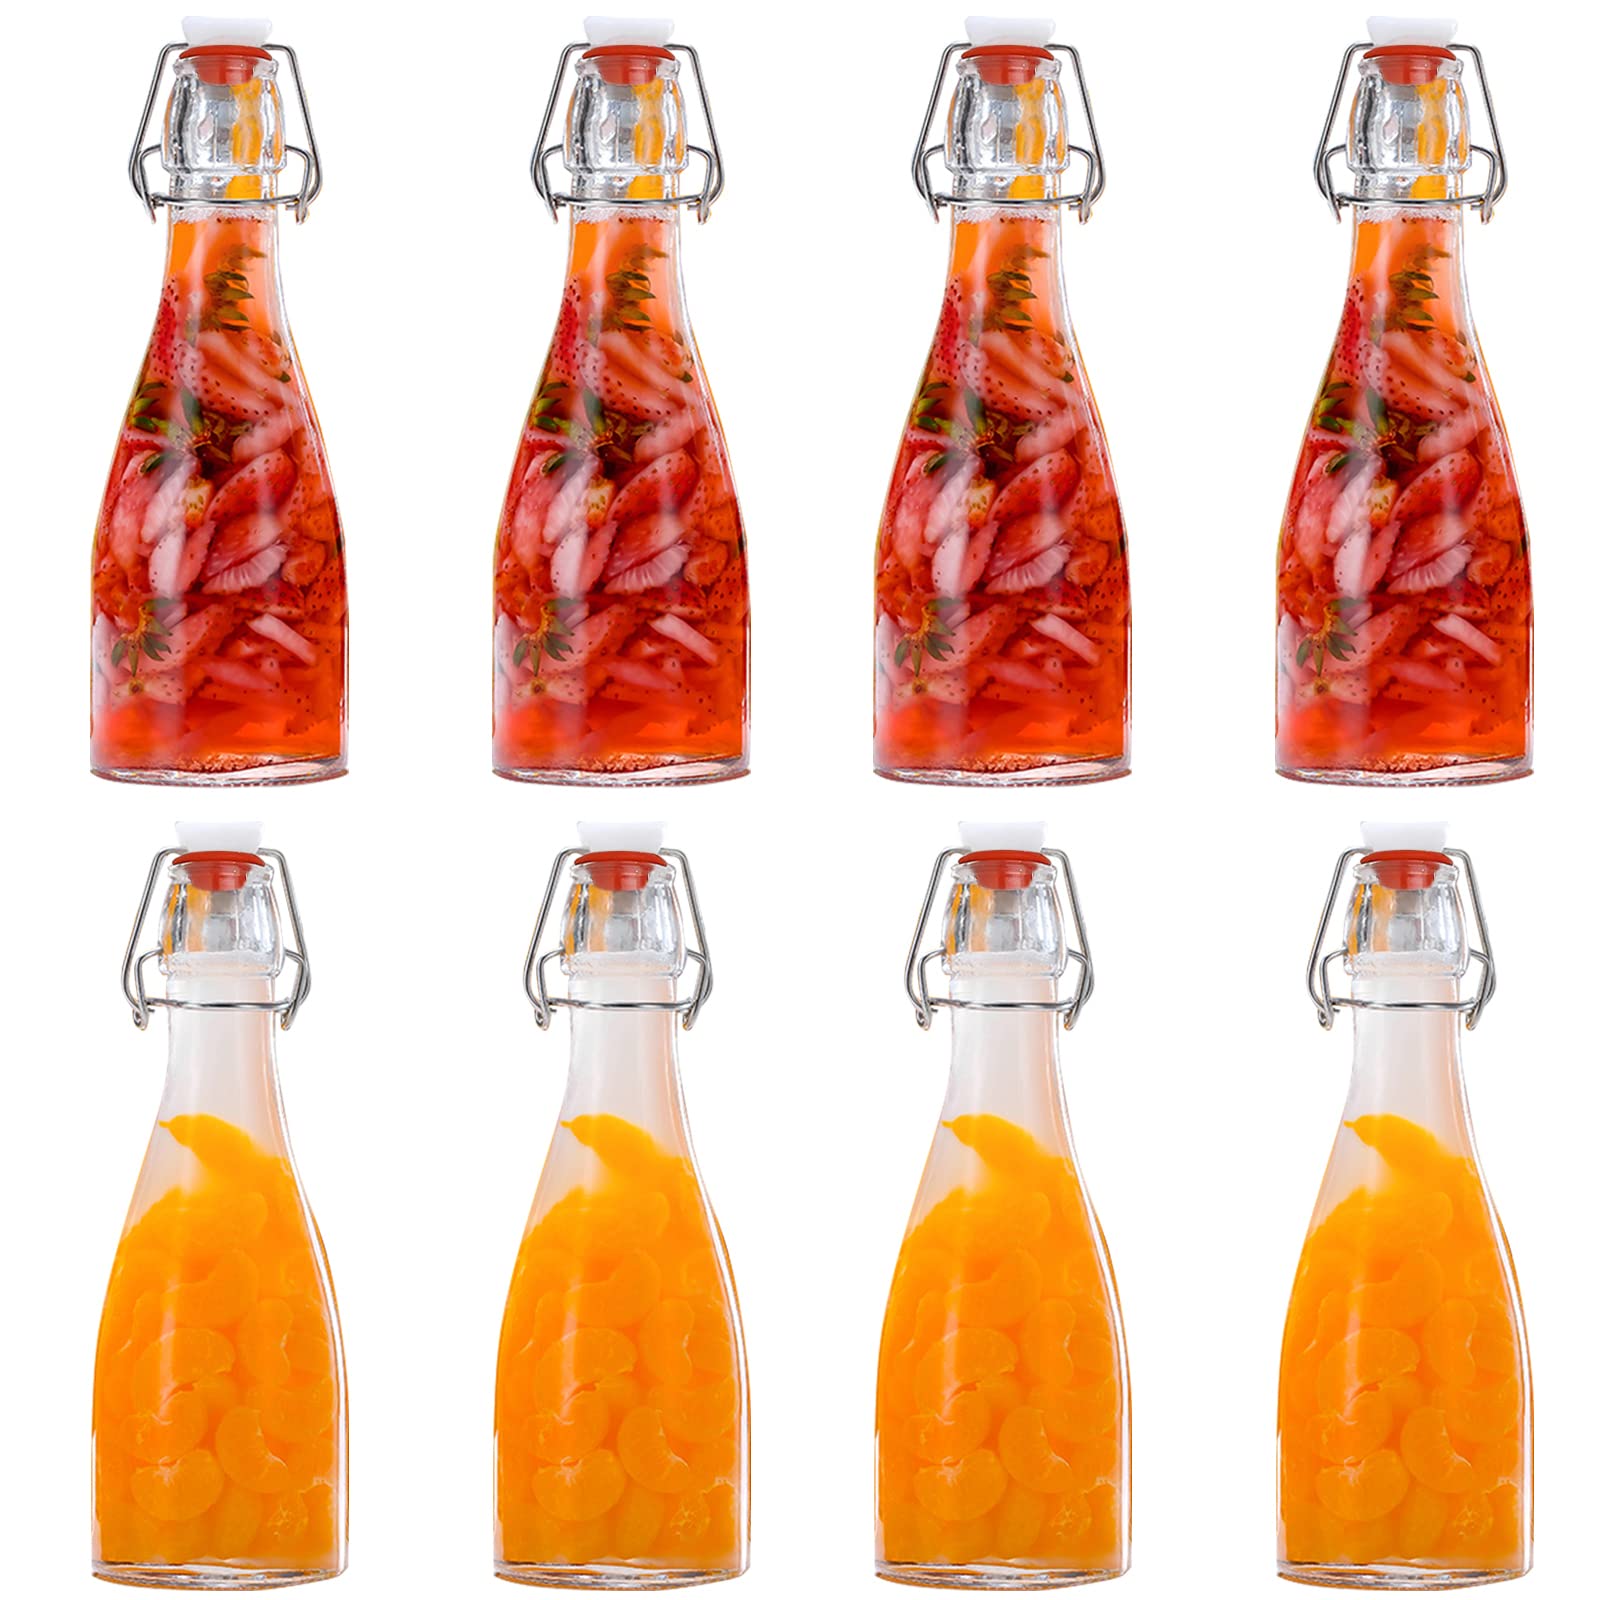 Tebery 8 Pack Clear Round Swing Top Glass Bottles, 12oz Size Flip Top Bottle for Second Fermentation, Limoncello, Kombucha, Water Kefir, Brewing Beer